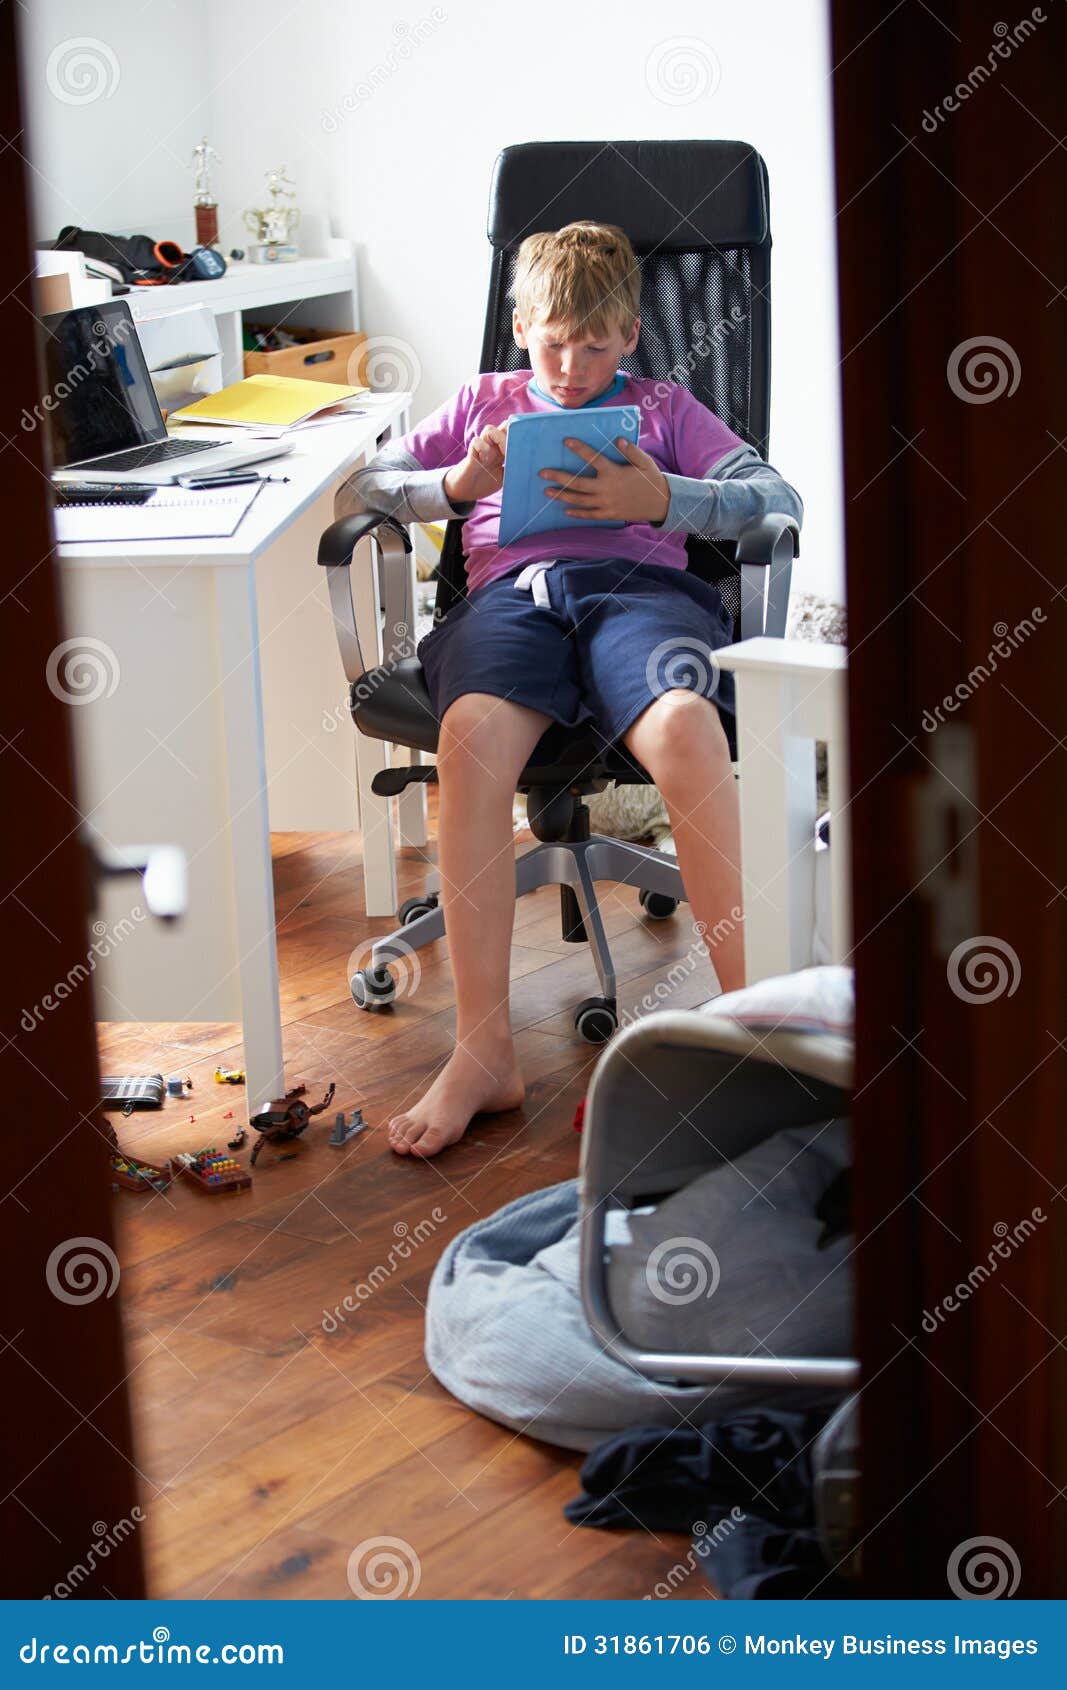 Boy Playing Video Game In Bedroom Royalty Free Stock Image - Image ...